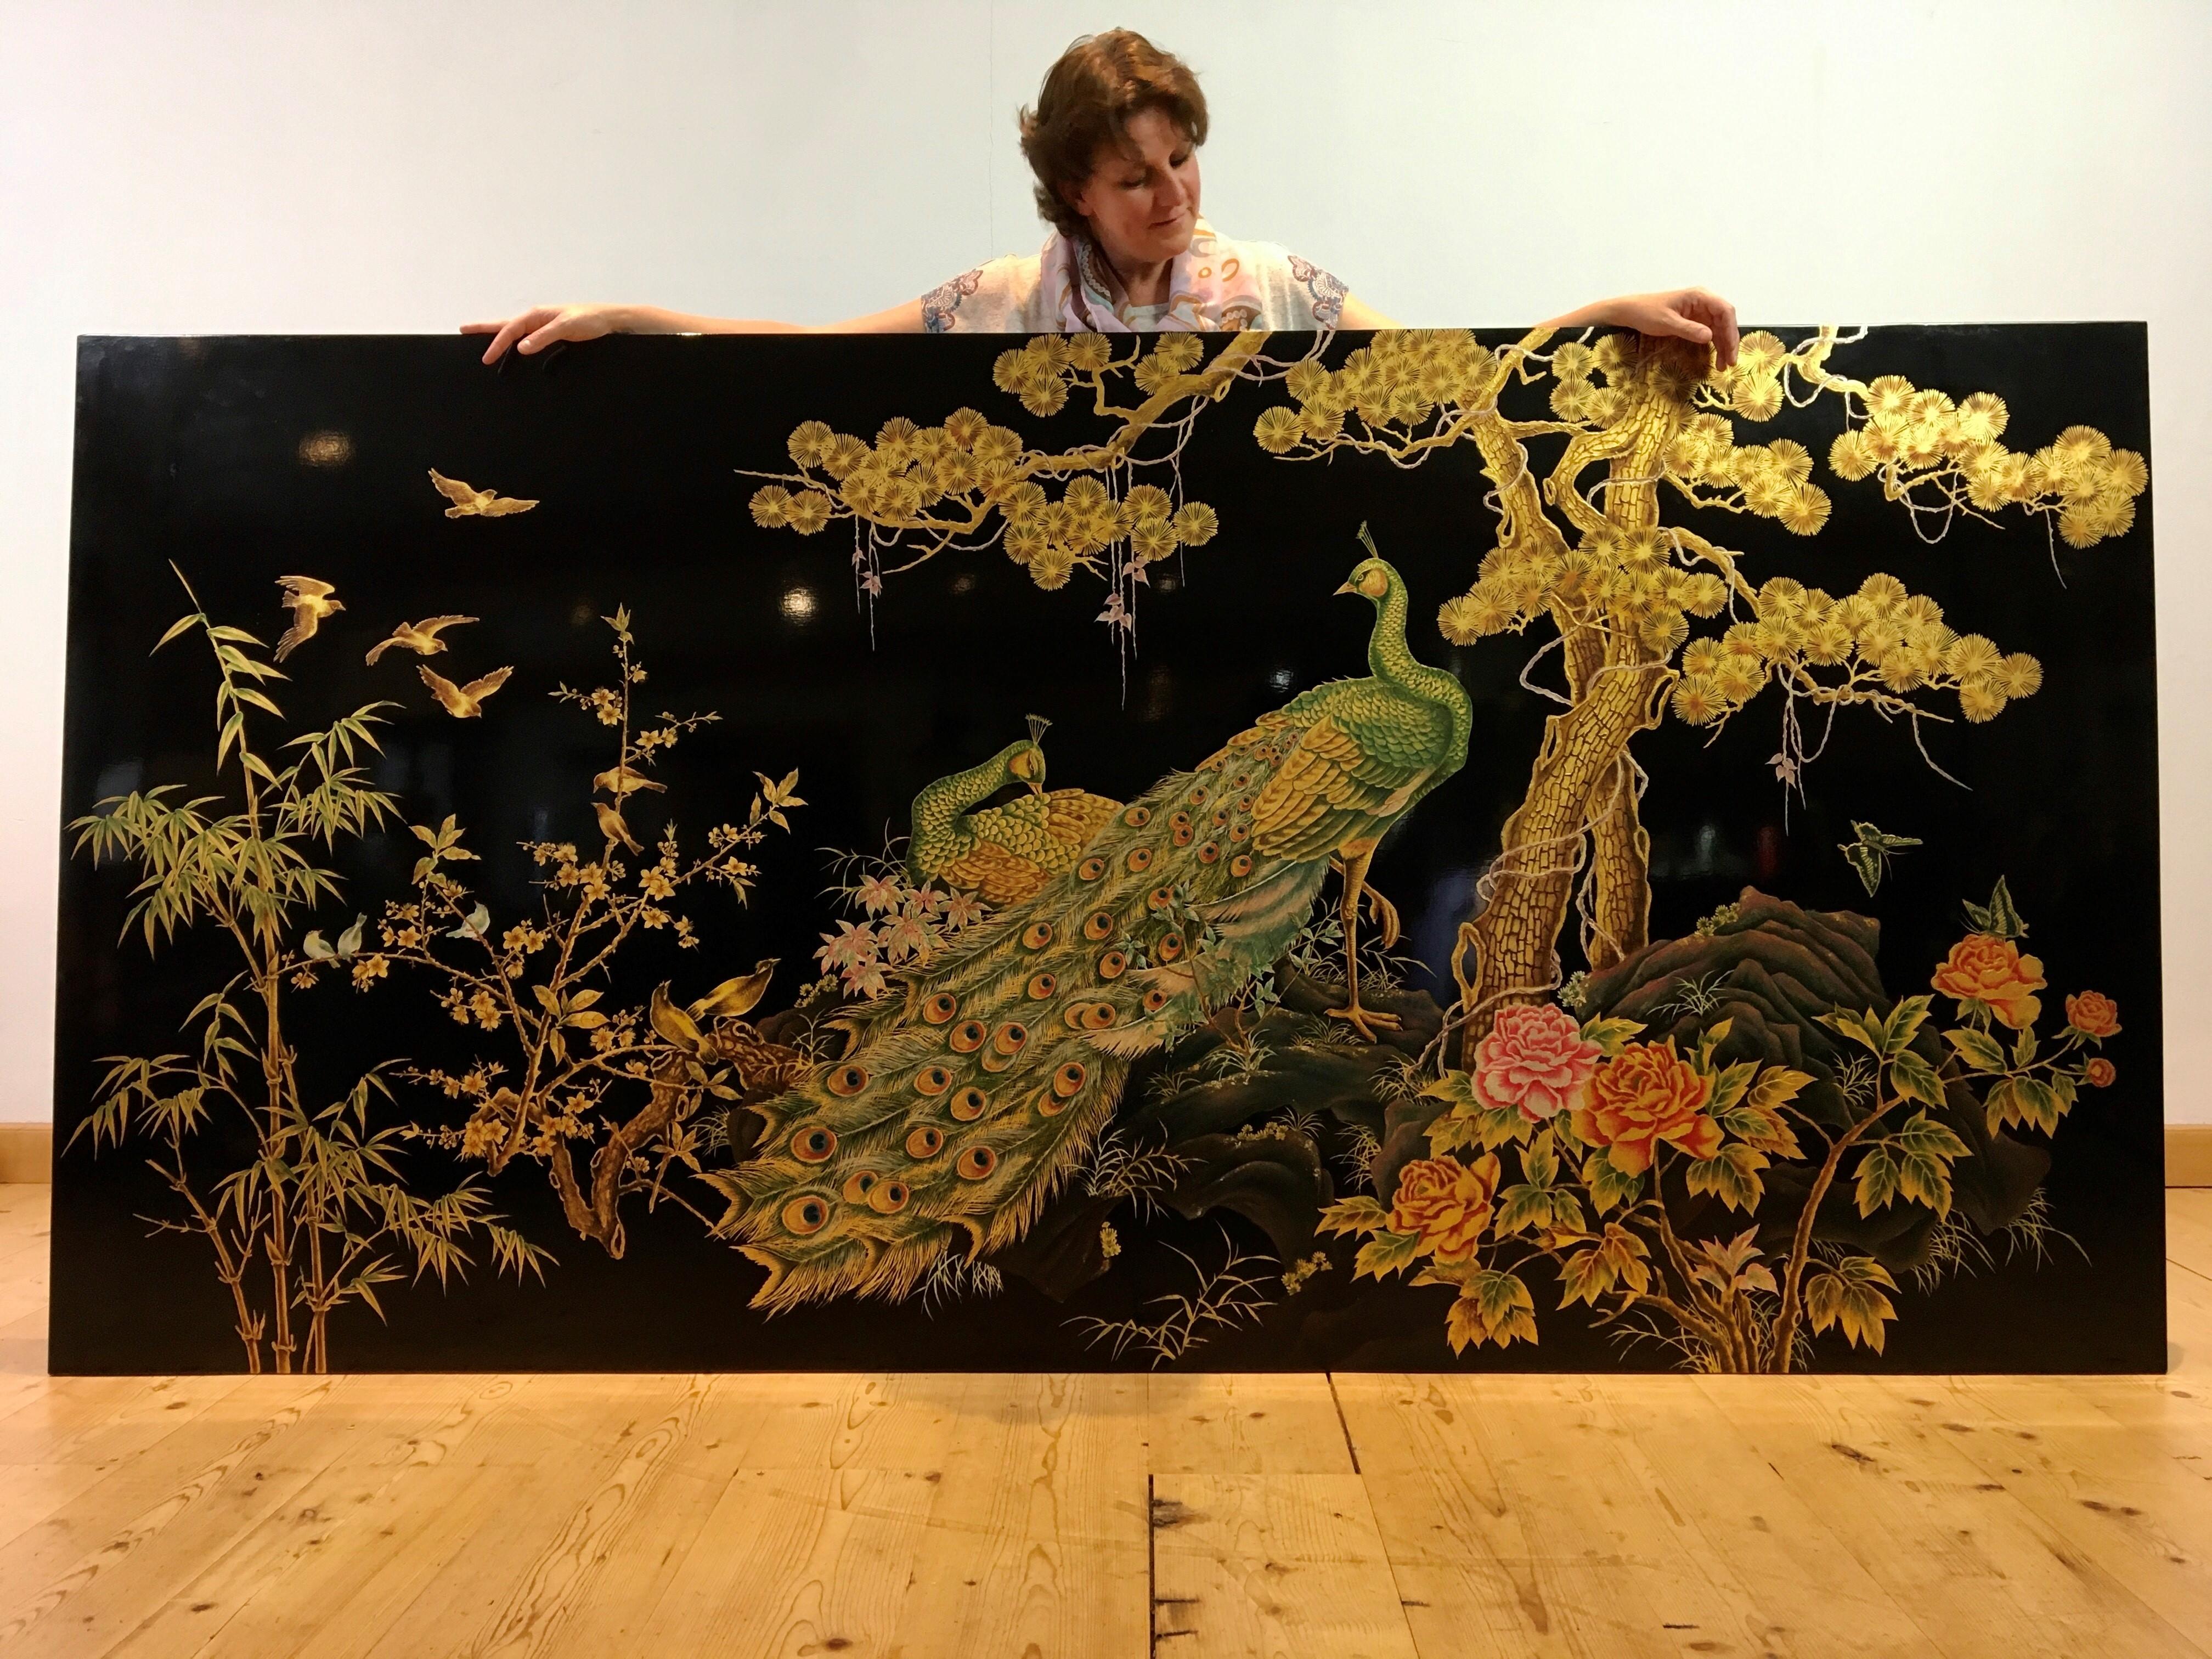 Stunning XL Asian wall panel with peacock and lots of birds.
A black shiny - black laquered panel with painted landscape with 2 peacock, birds, butterflies, flowers, bamboo plant, blossom trees etc ...
The use of goldpaint makes this art panel very